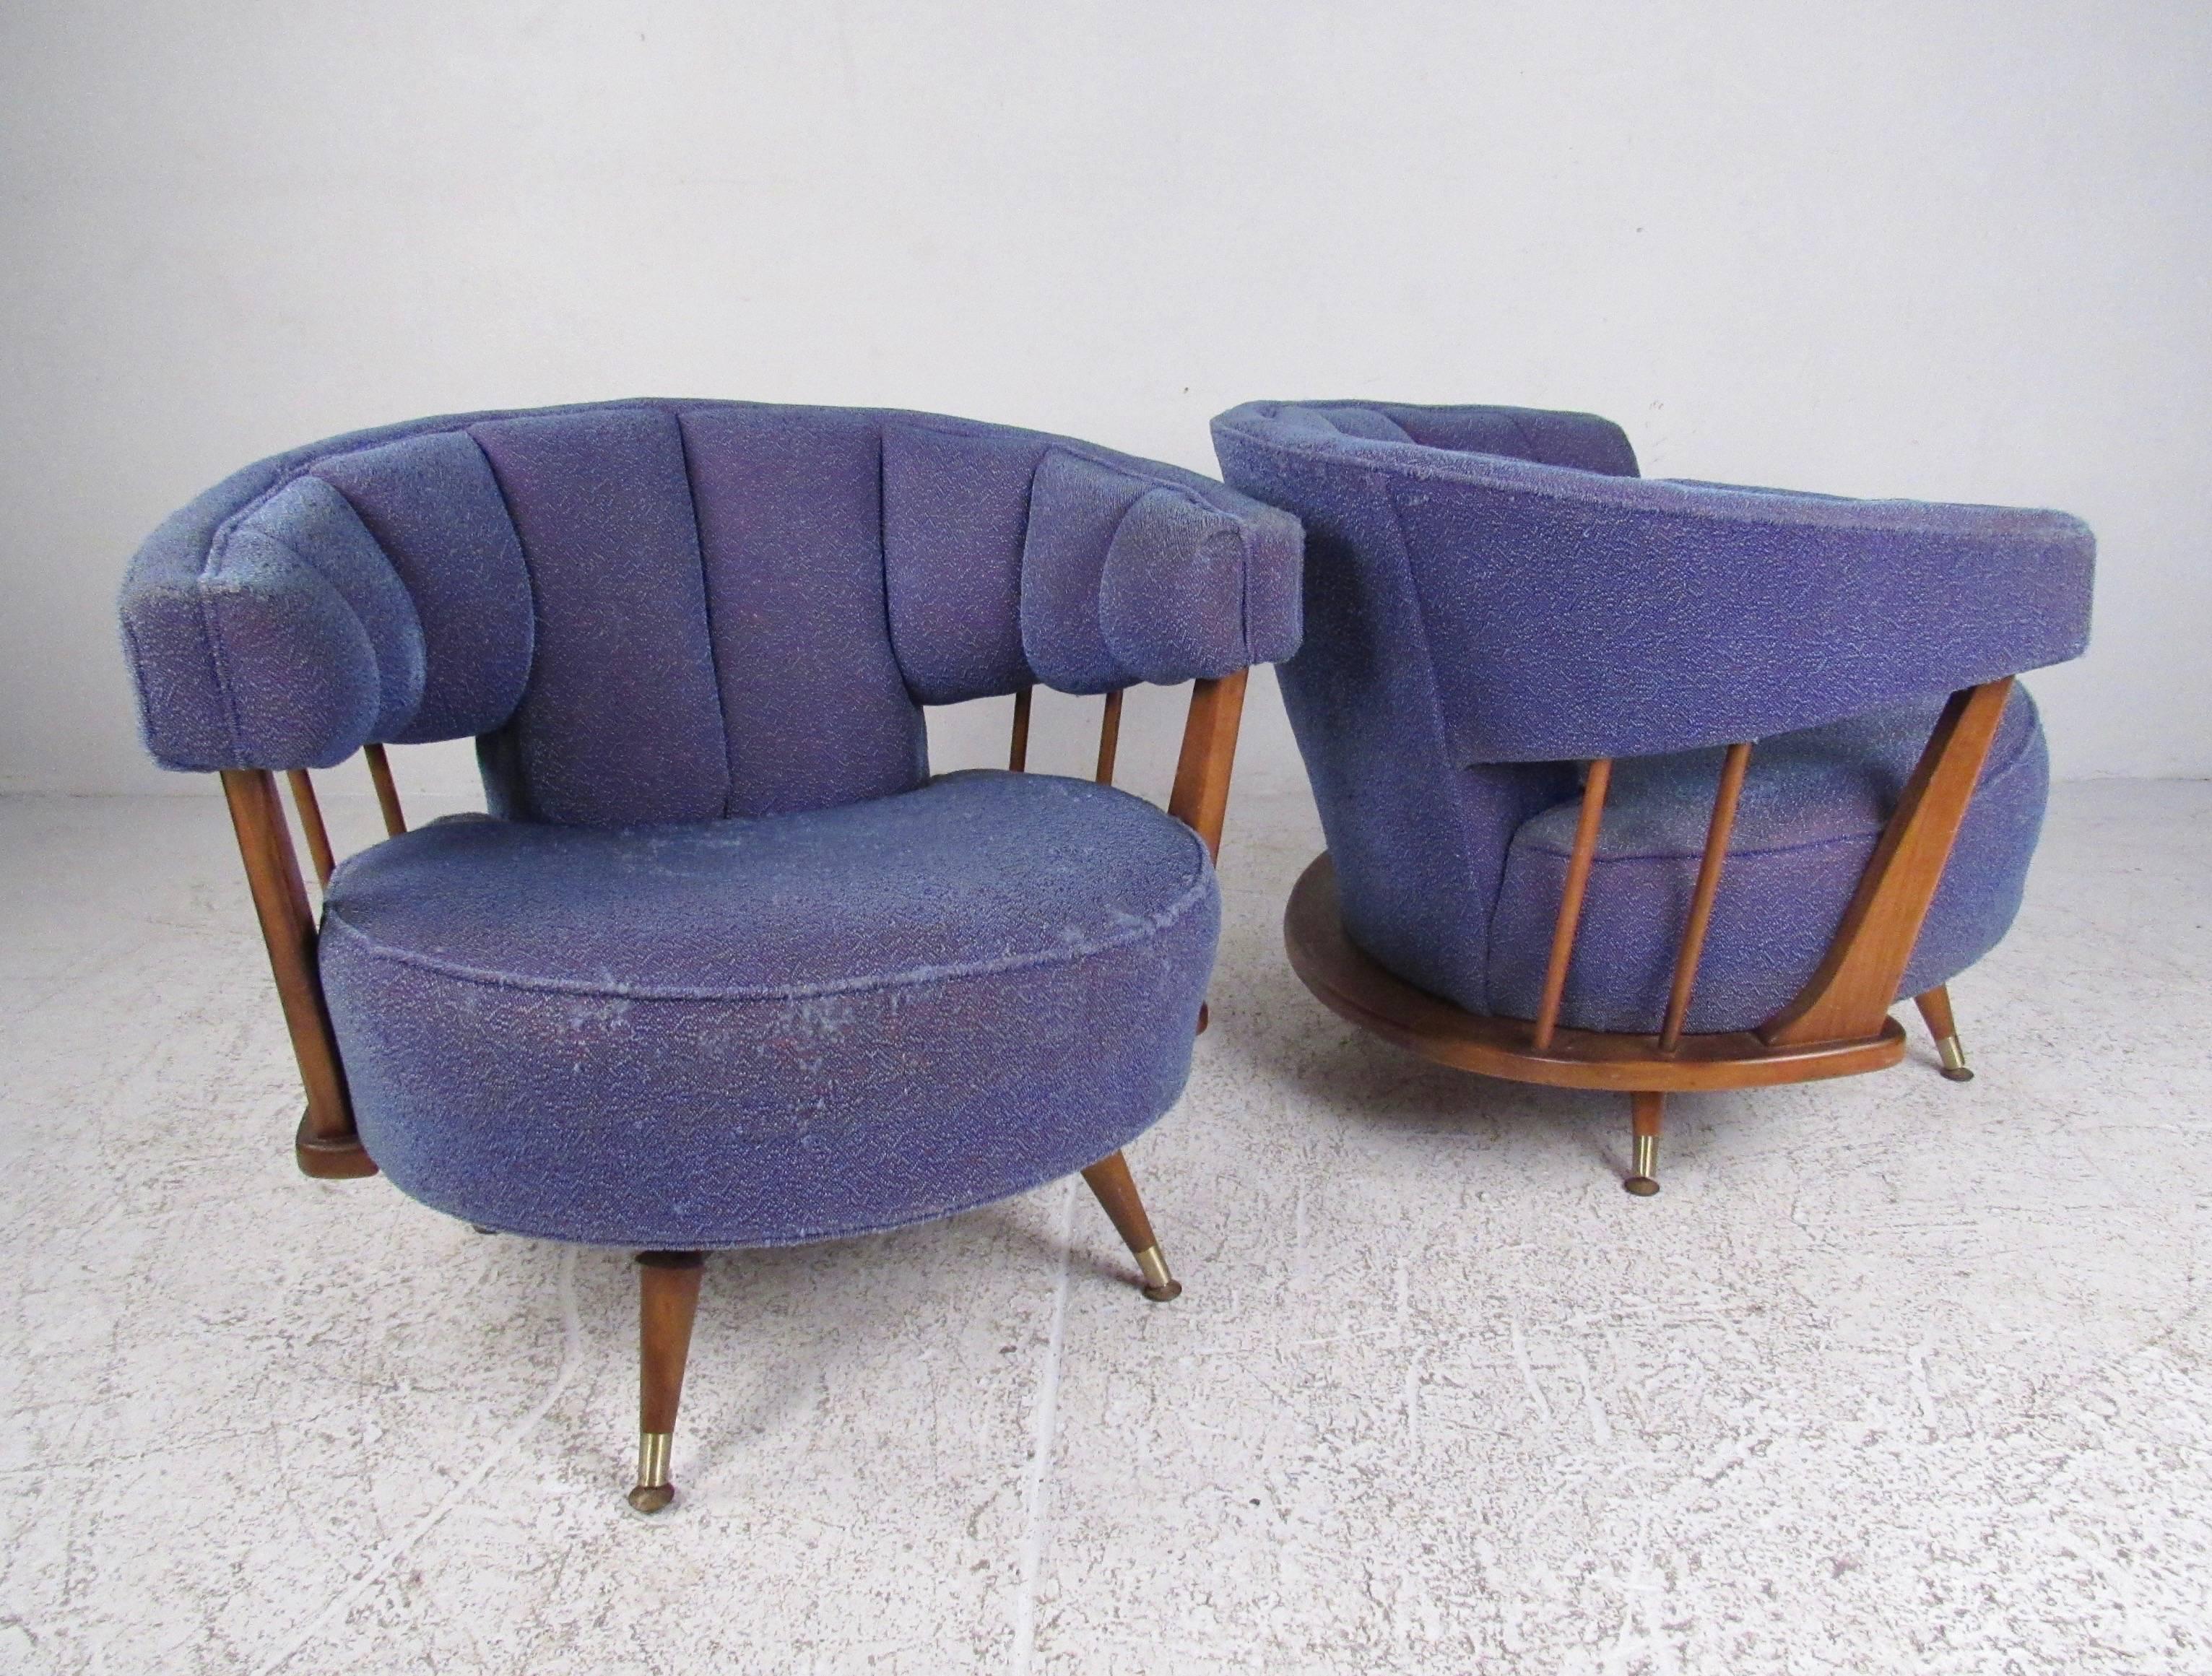 This stylish pair of Danish modern chairs feature walnut swivel frames, barrel back seats, and tapered legs with brass sabots. Unique mid-century style makes these vintage lounge chairs the perfect addition for home or business seating. Please